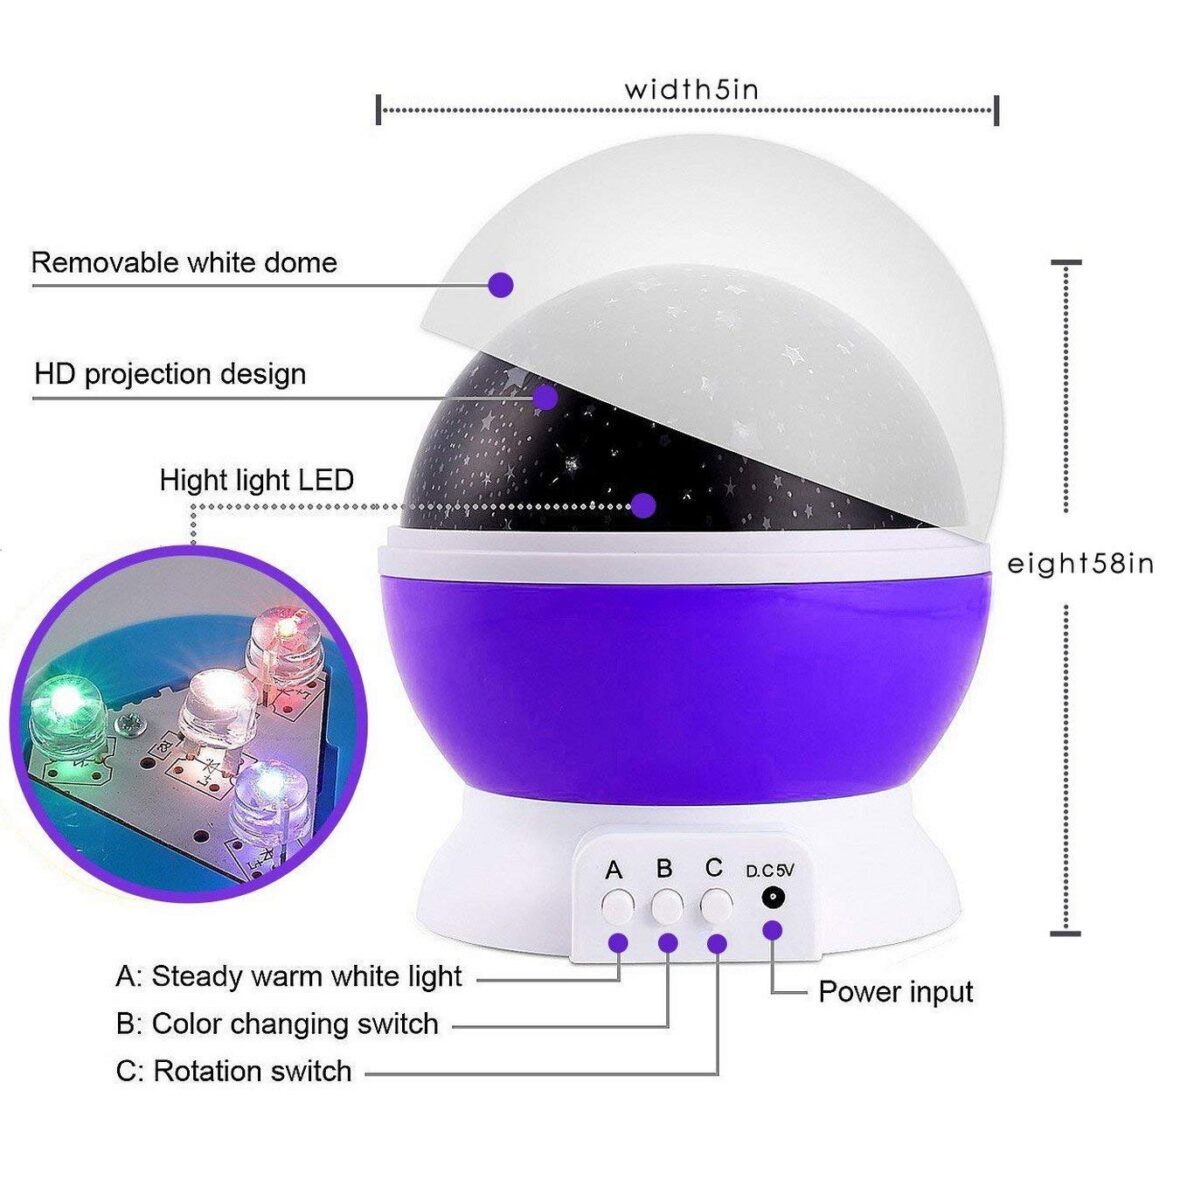 Star Master Rotating 360 Degree Moon Night Light Lamp Projector with Colors and USB Cable,Lamp for Kids Room Night Bulb